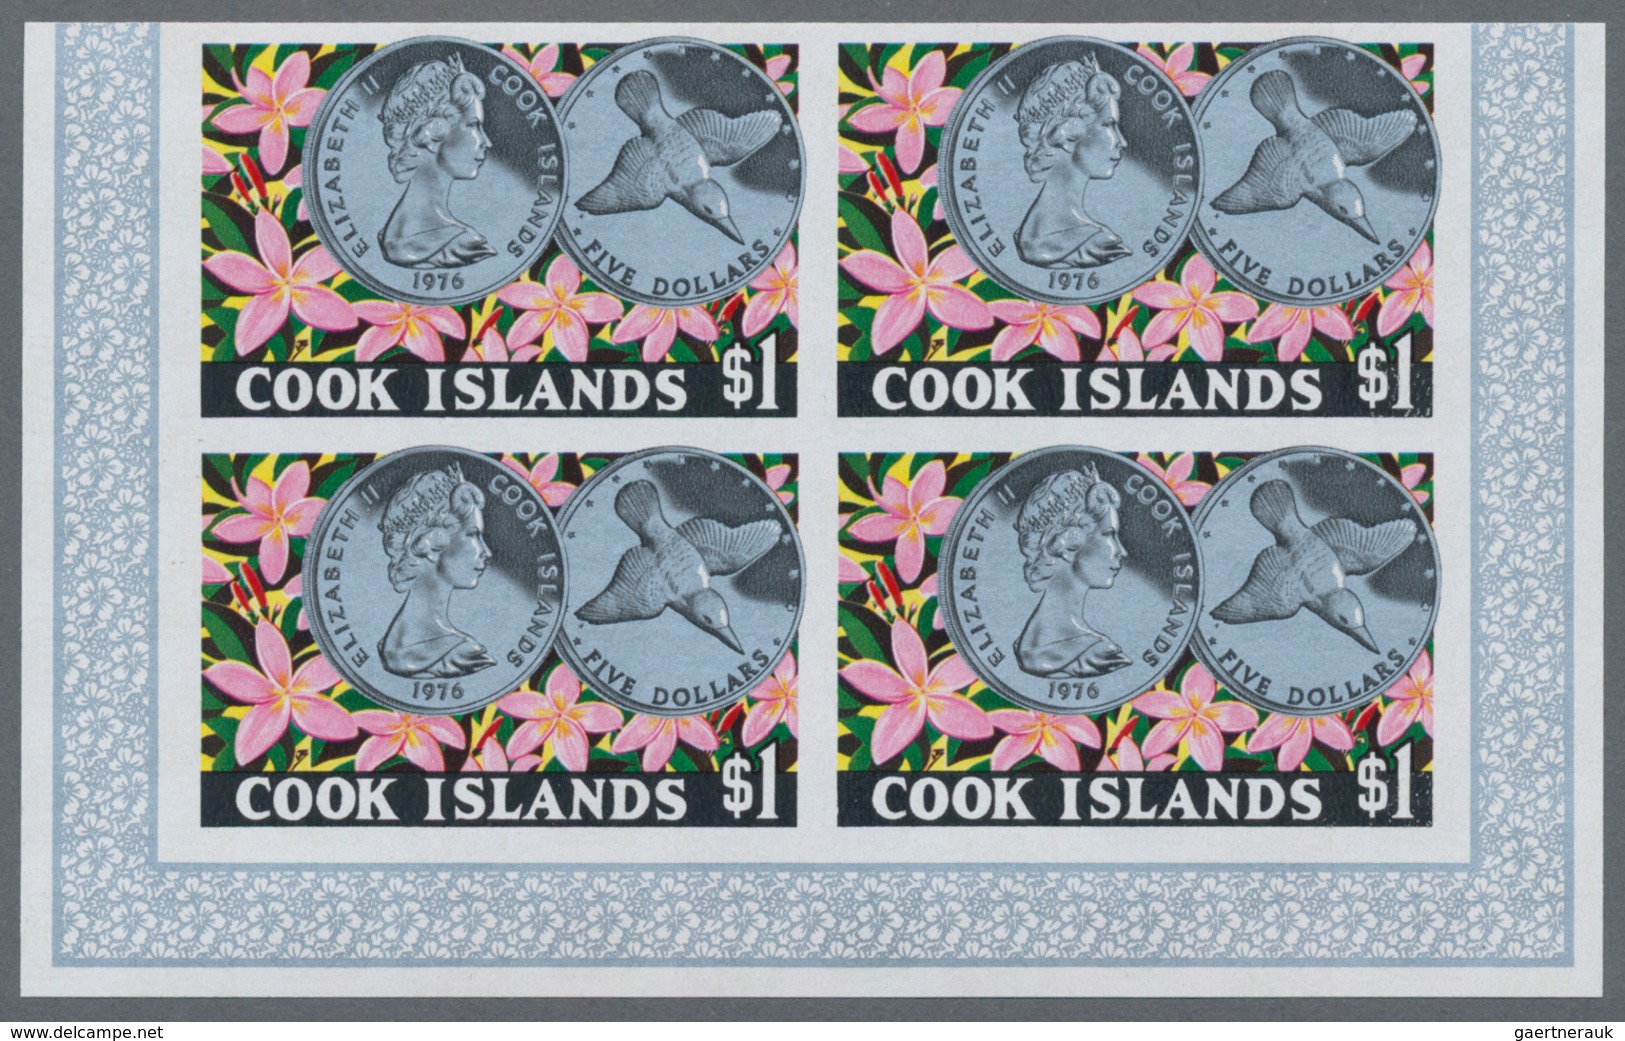 Ozeanien: 1970/1985 (ca.), accumulation from COOK ISLANDS, AITUTAKI, NIUE and PENRHYN with approx. 7